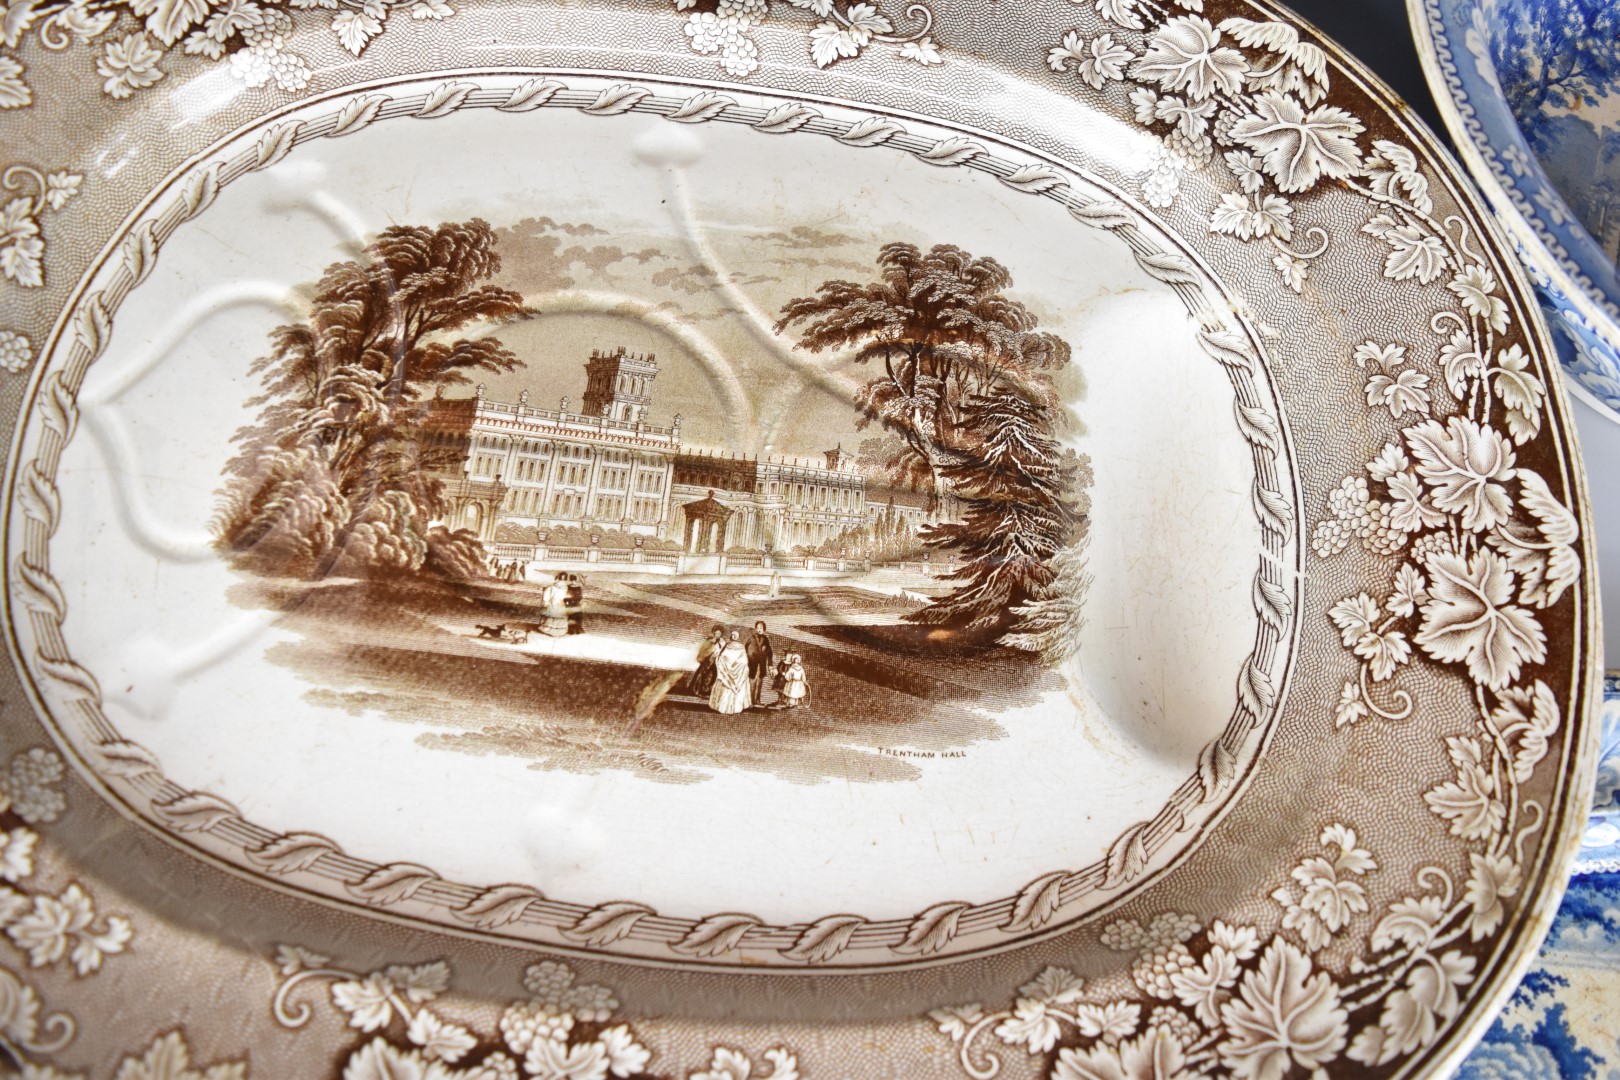 19thC transfer printed sepia meat platter the well decorated with Trentham Hall scene and a - Image 13 of 16